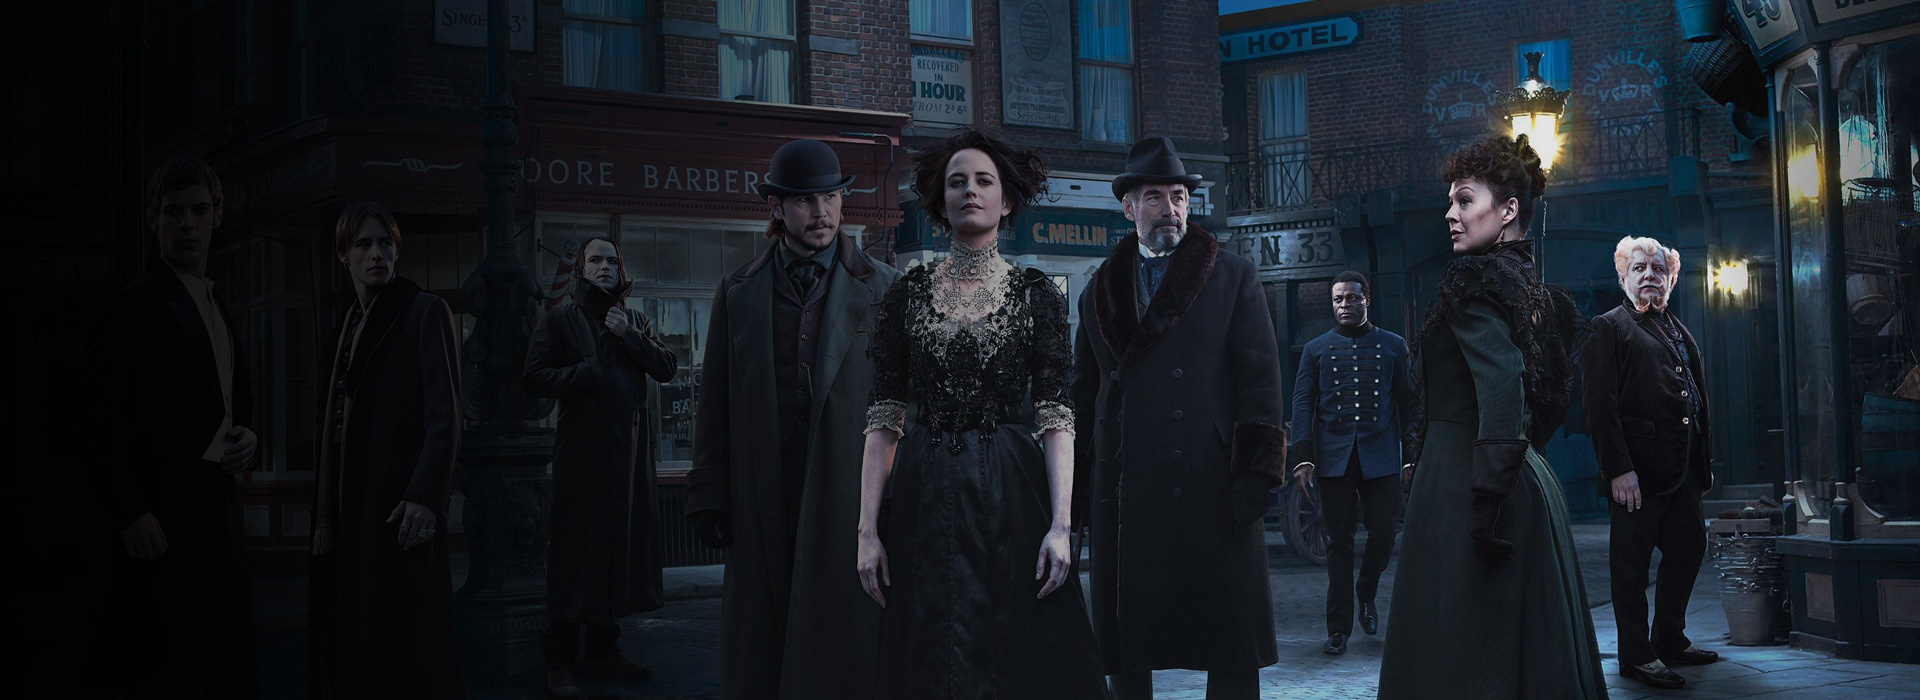 Series poster Penny Dreadful